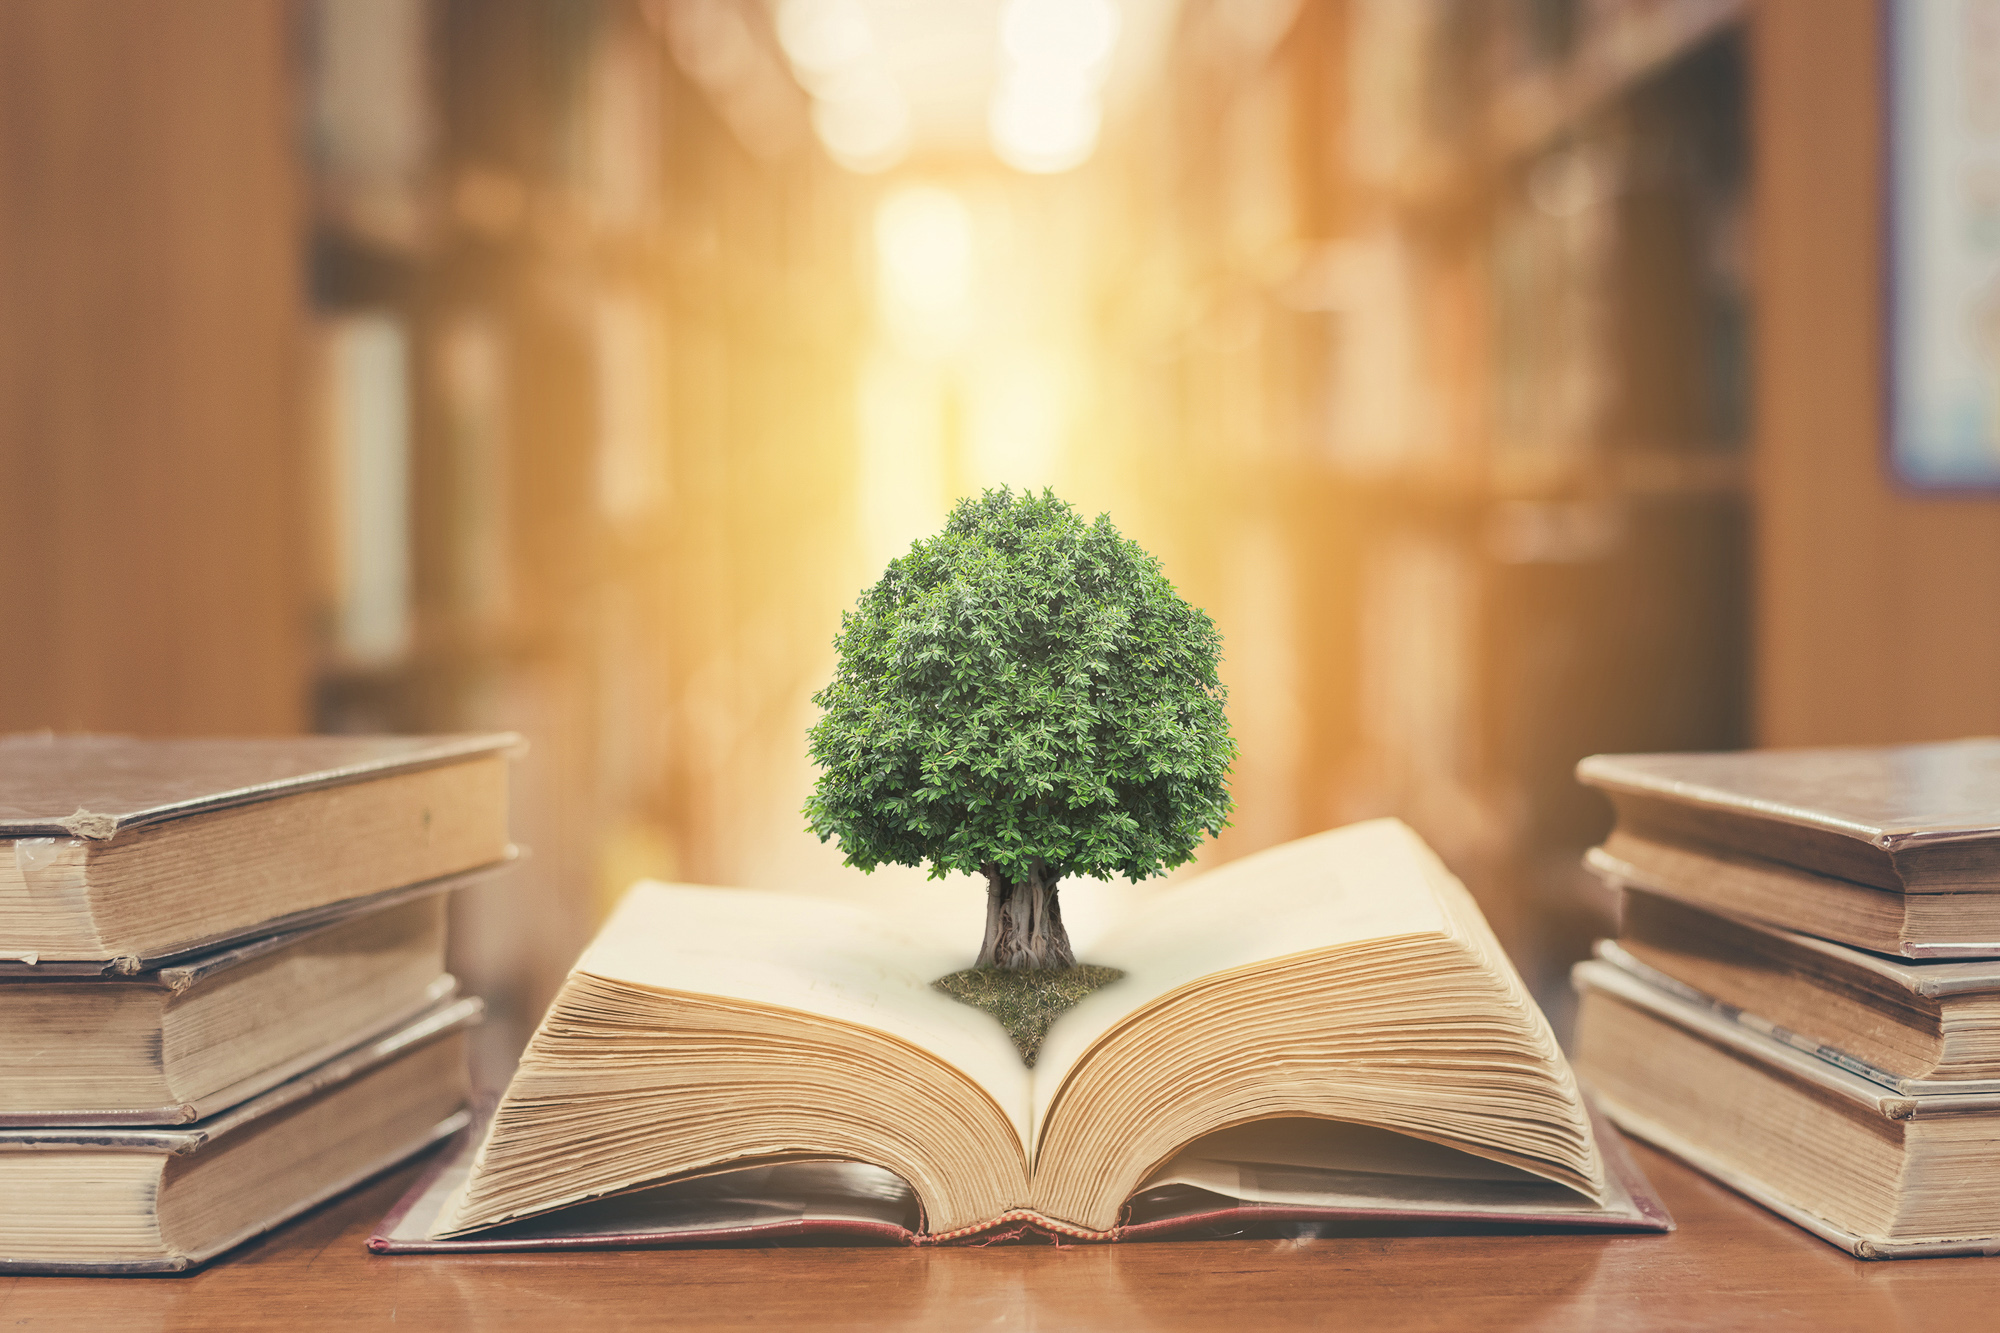 Tree on book in library